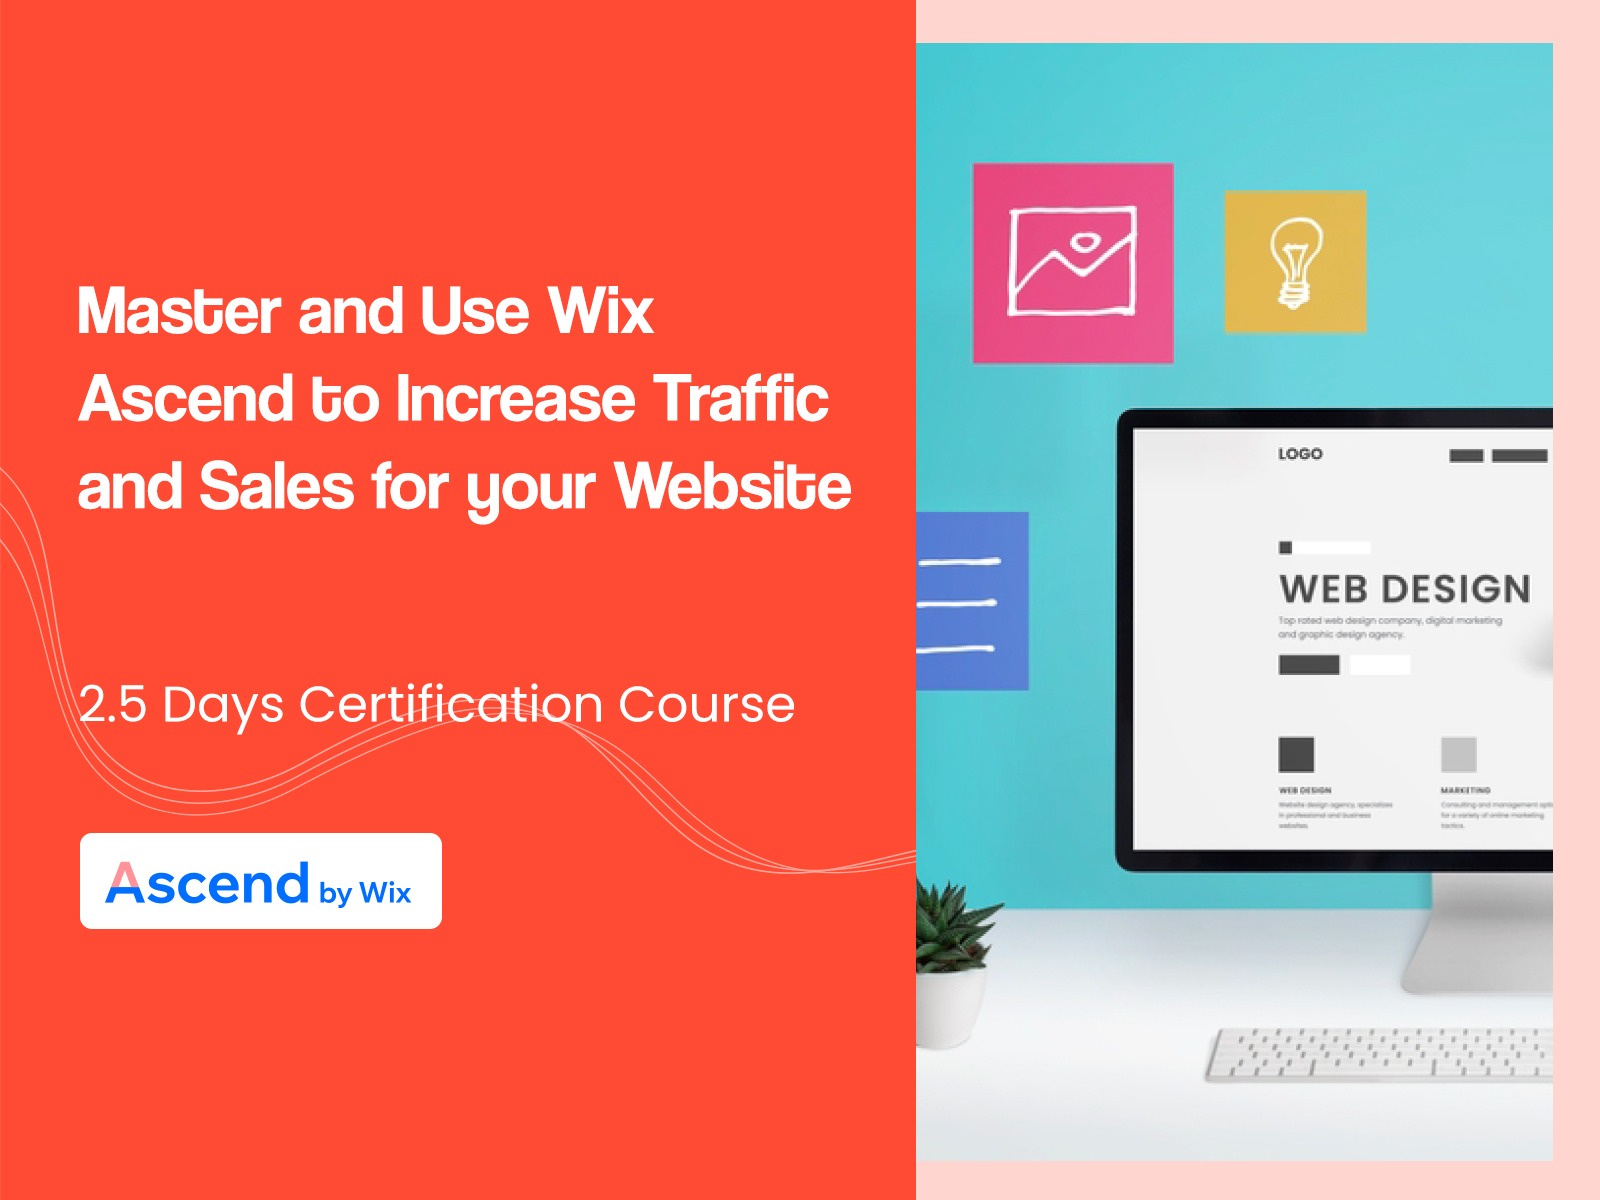 Master and Use Wix Ascend to Increase Traffic and Sales for your Website course in Singapore